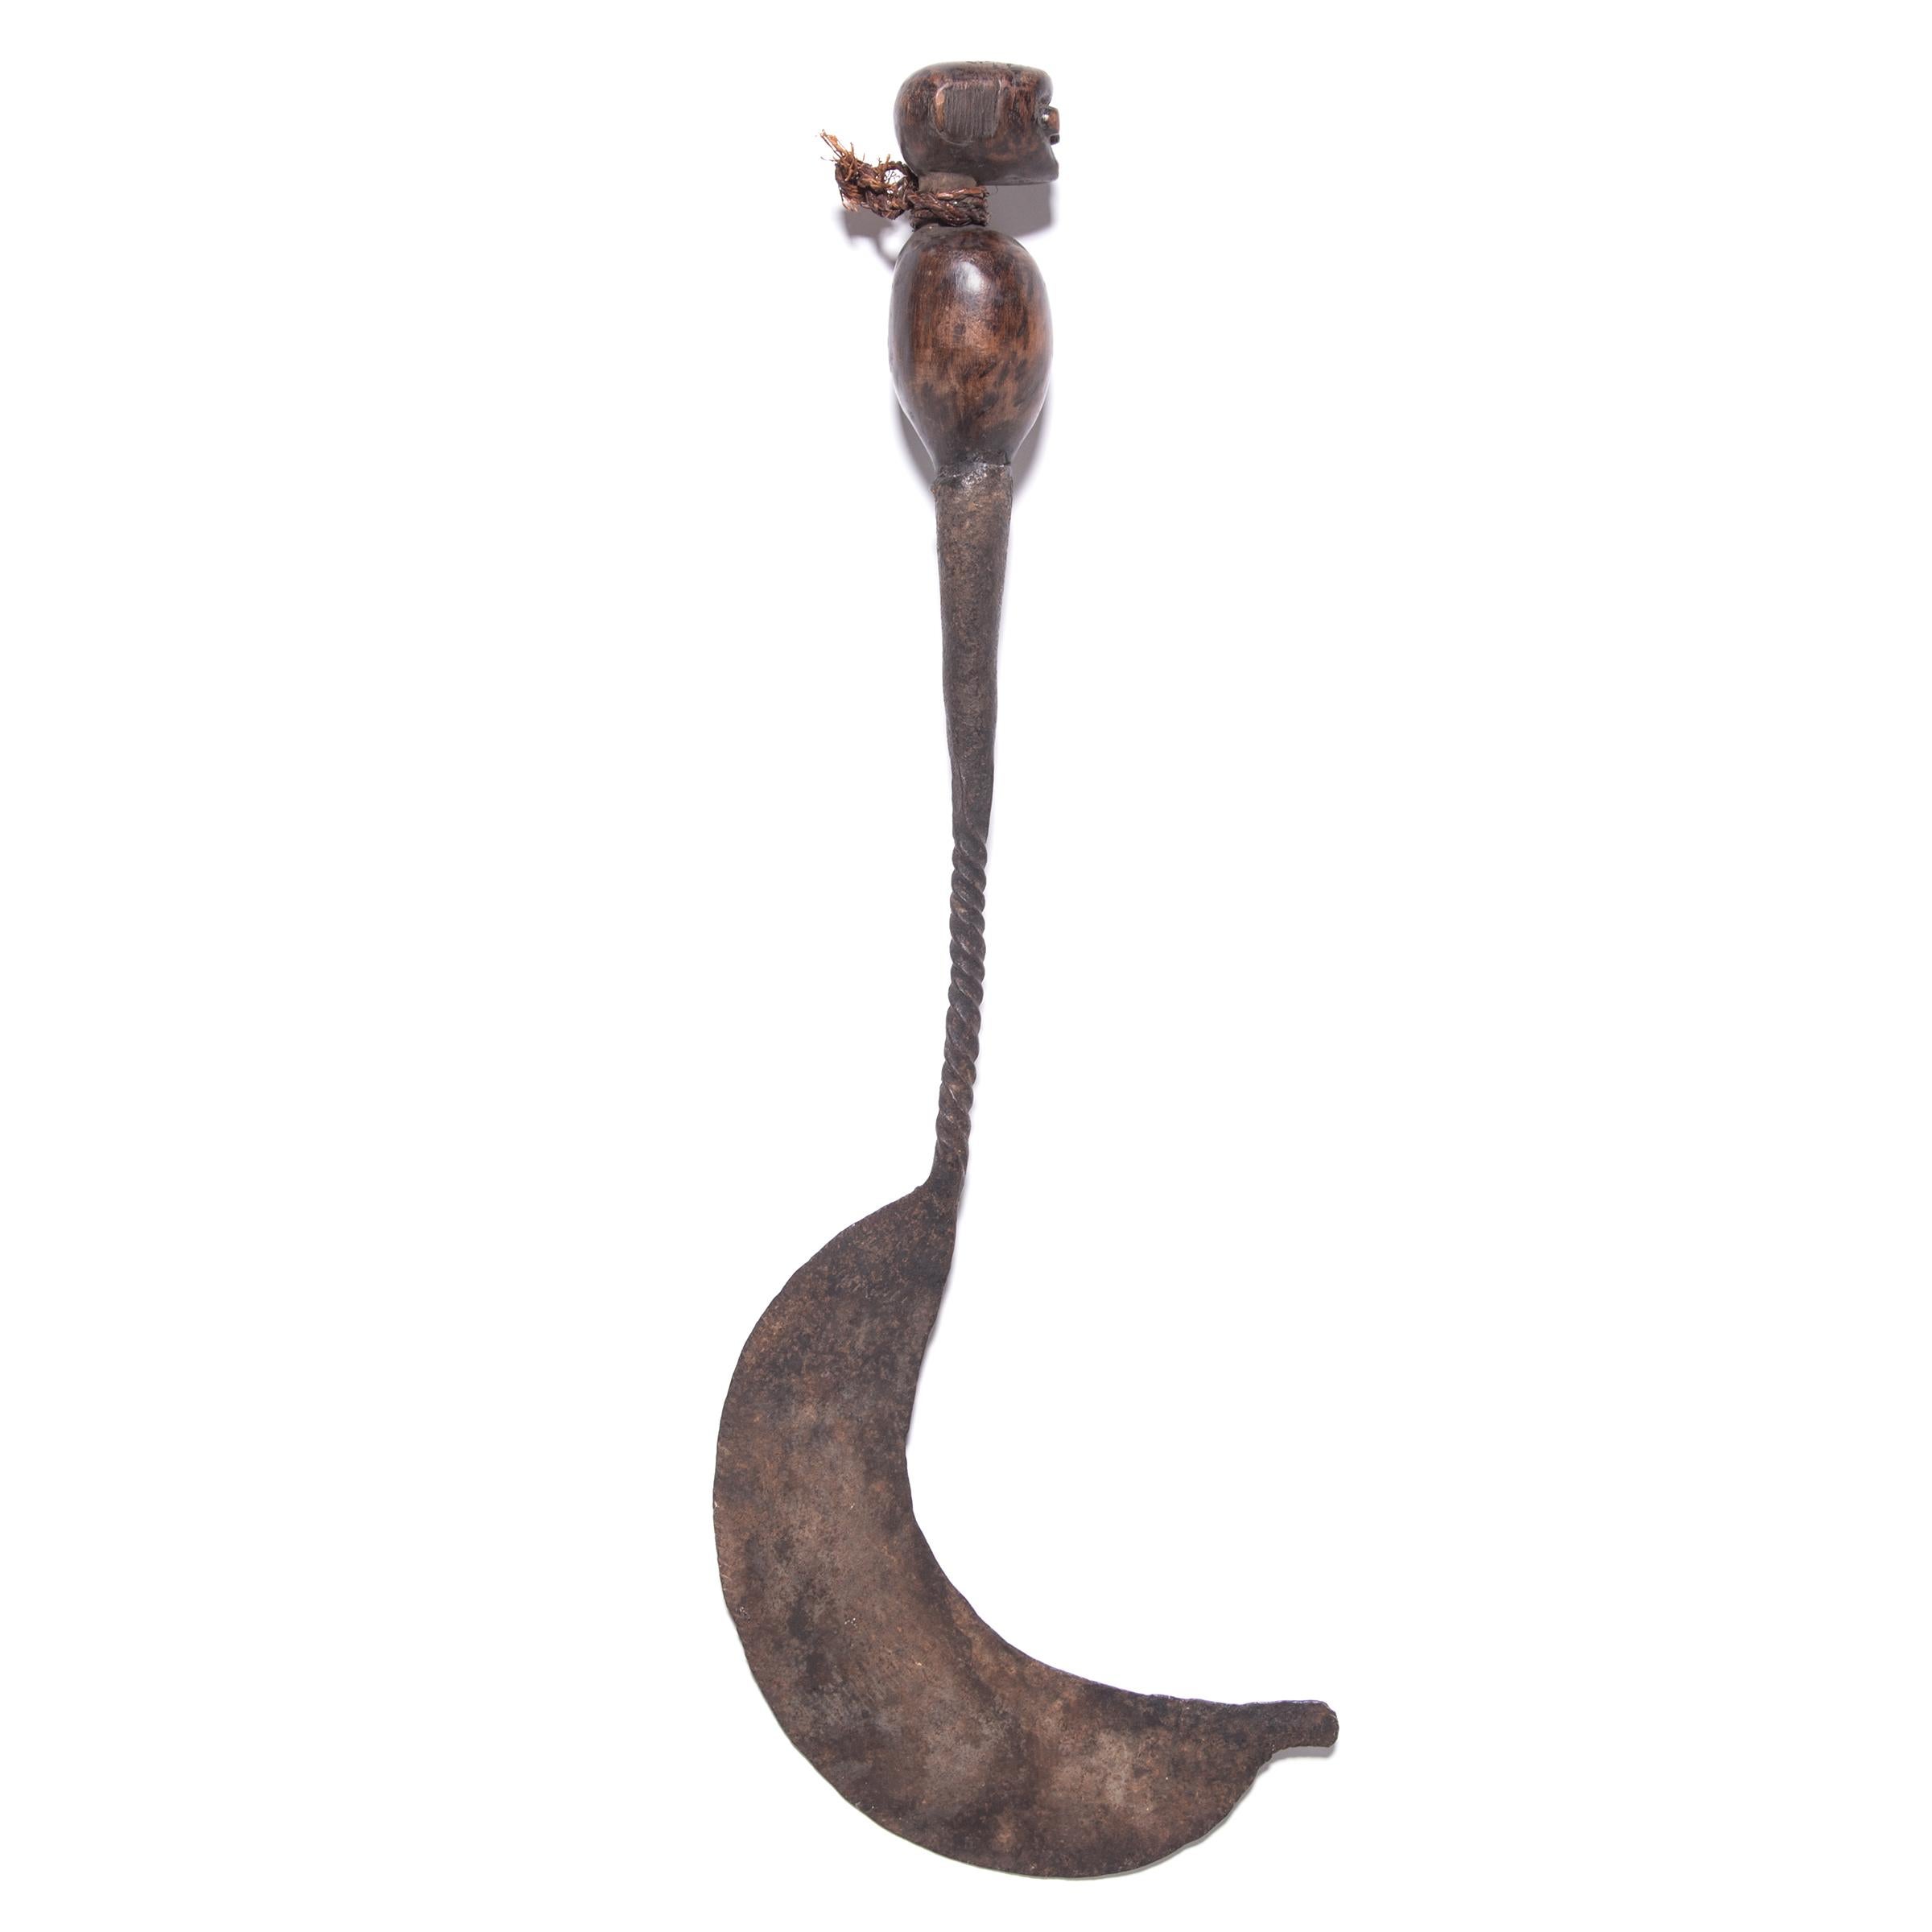 Many pre-coinage African currencies were formed after objects of inherent practical value. This sickle-form iron currency created by an artisan of the Matakam people of Cameroon was shaped after a hand-held sickle to honor the Community's reliance